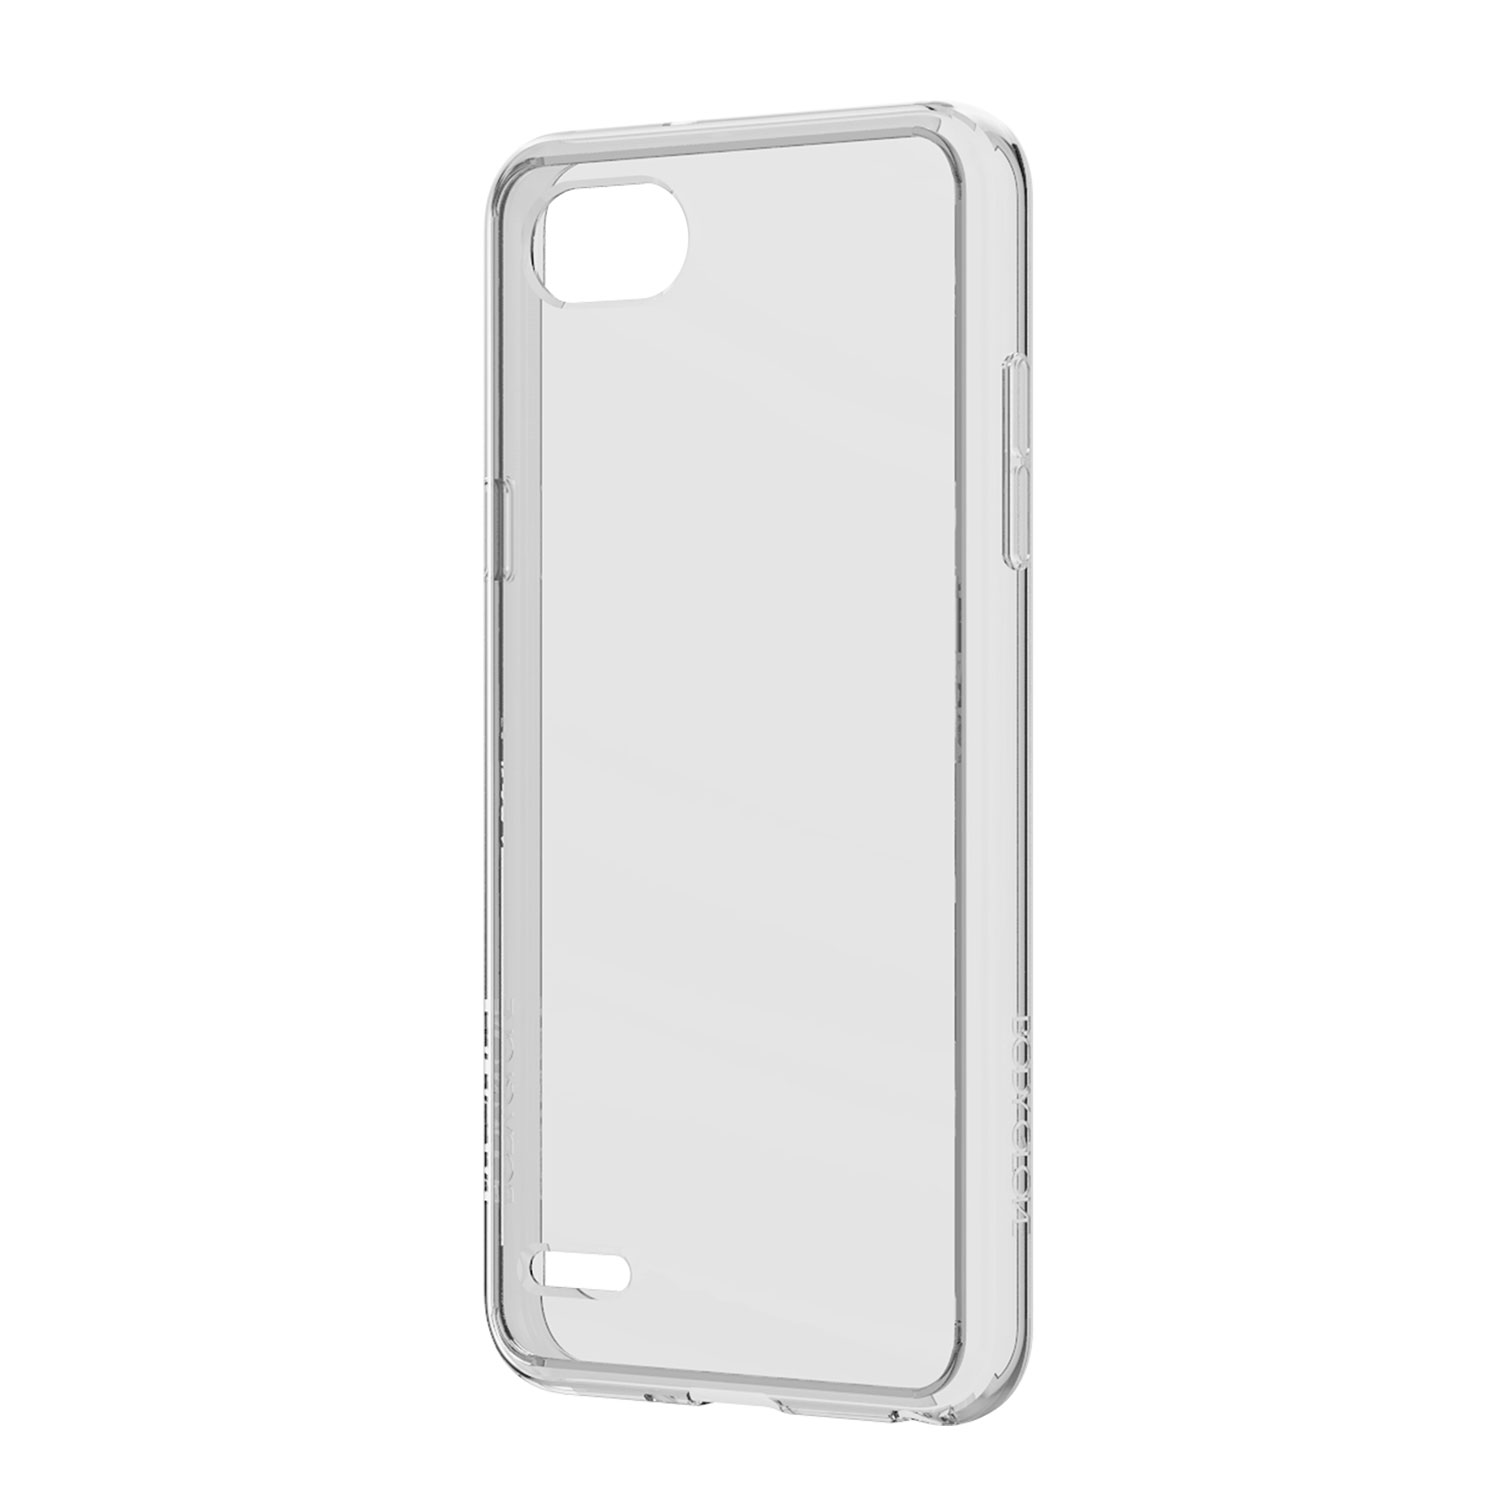 Body Glove Ghost Case for LG Q6 – Clear